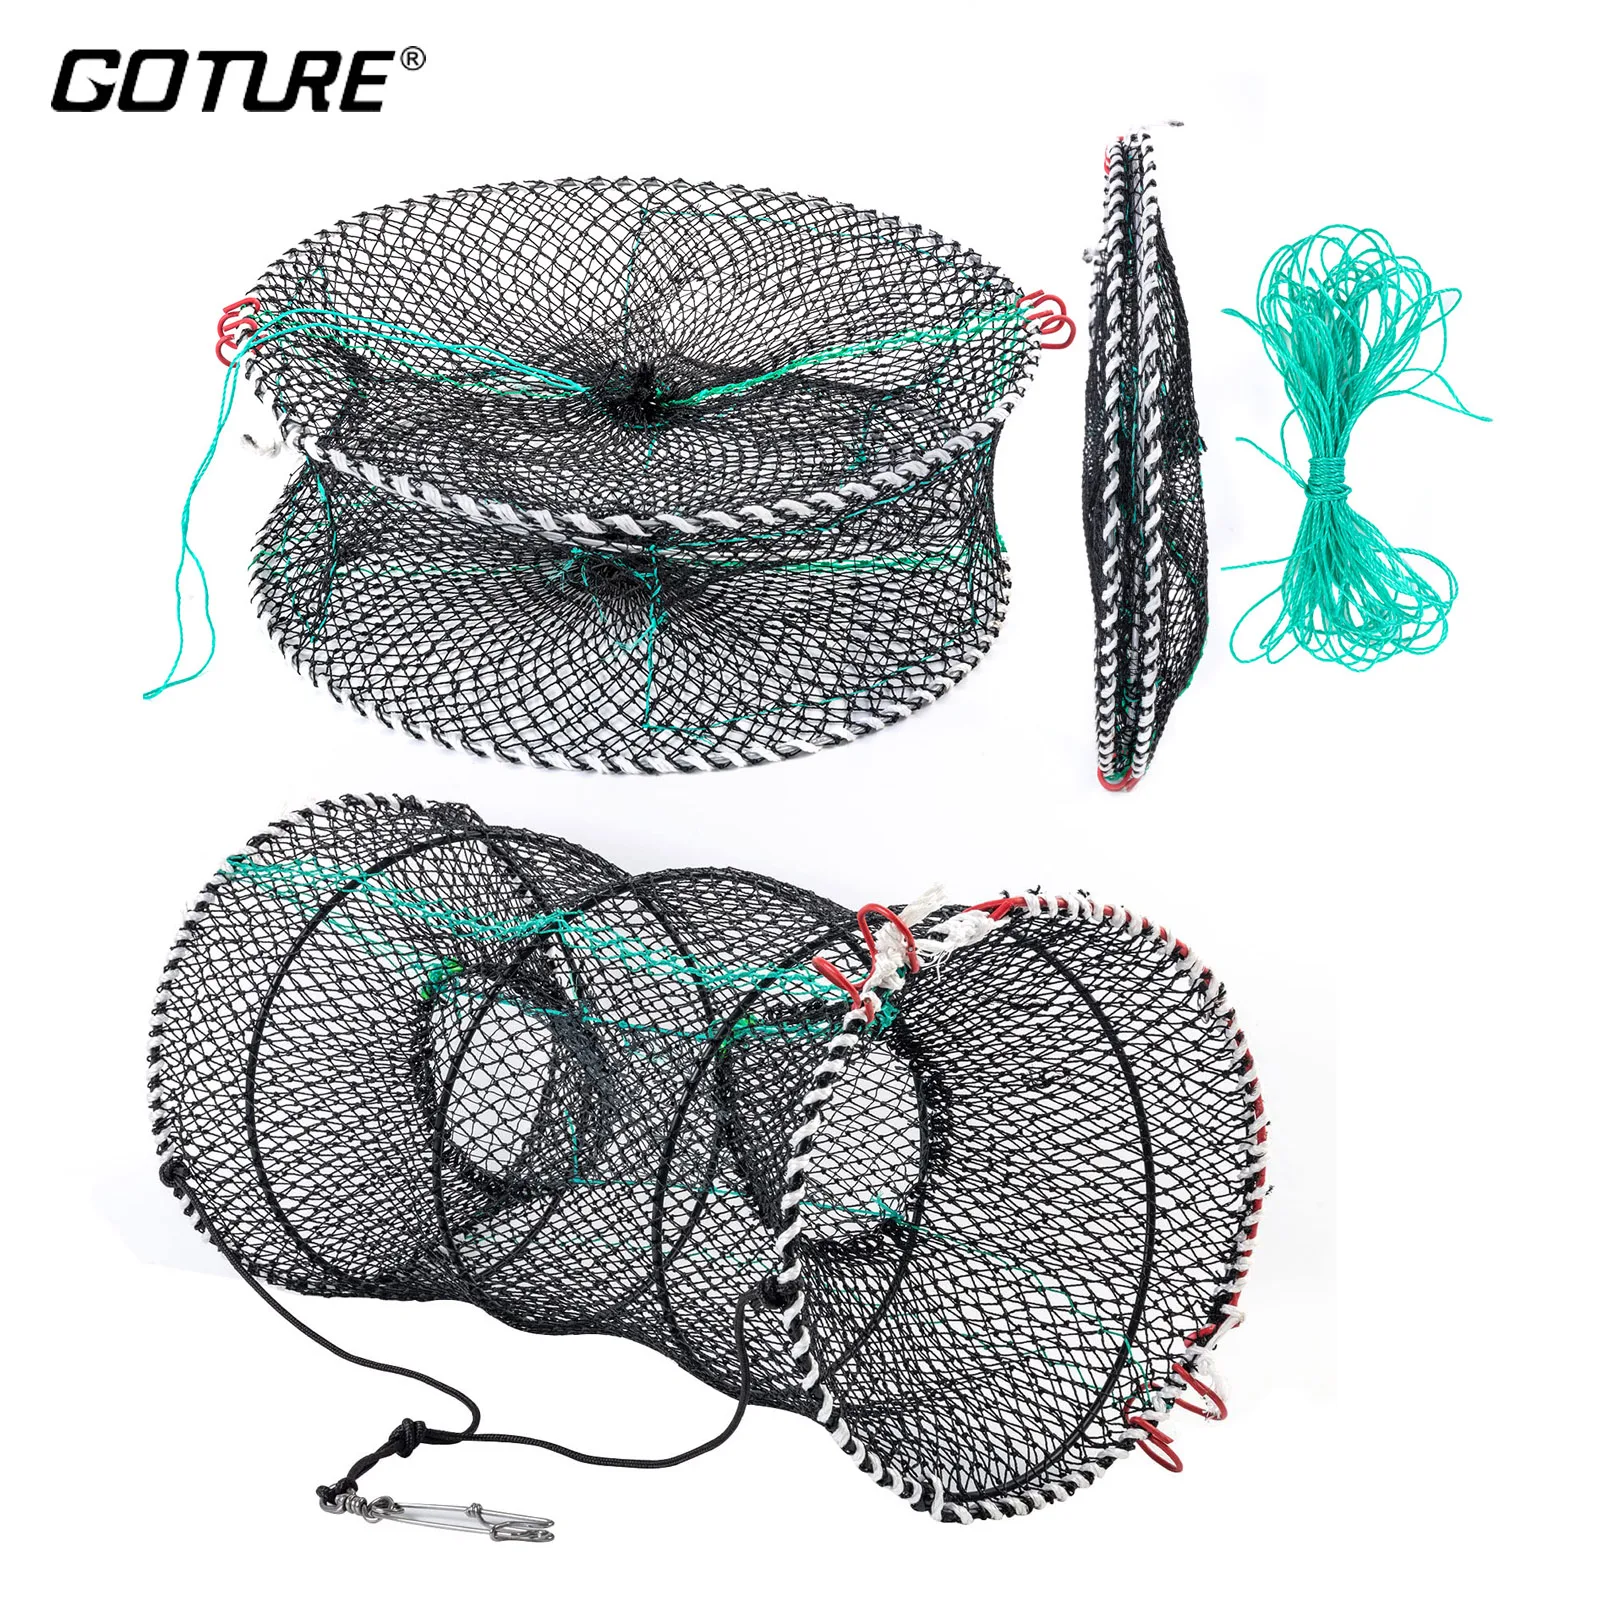 

Goture Portable Fishing Landing Net Foldable Bait Cast Mesh Fish Trap Shrimp Cage For Fish Crab Crayfish Catcher With Hand Rope